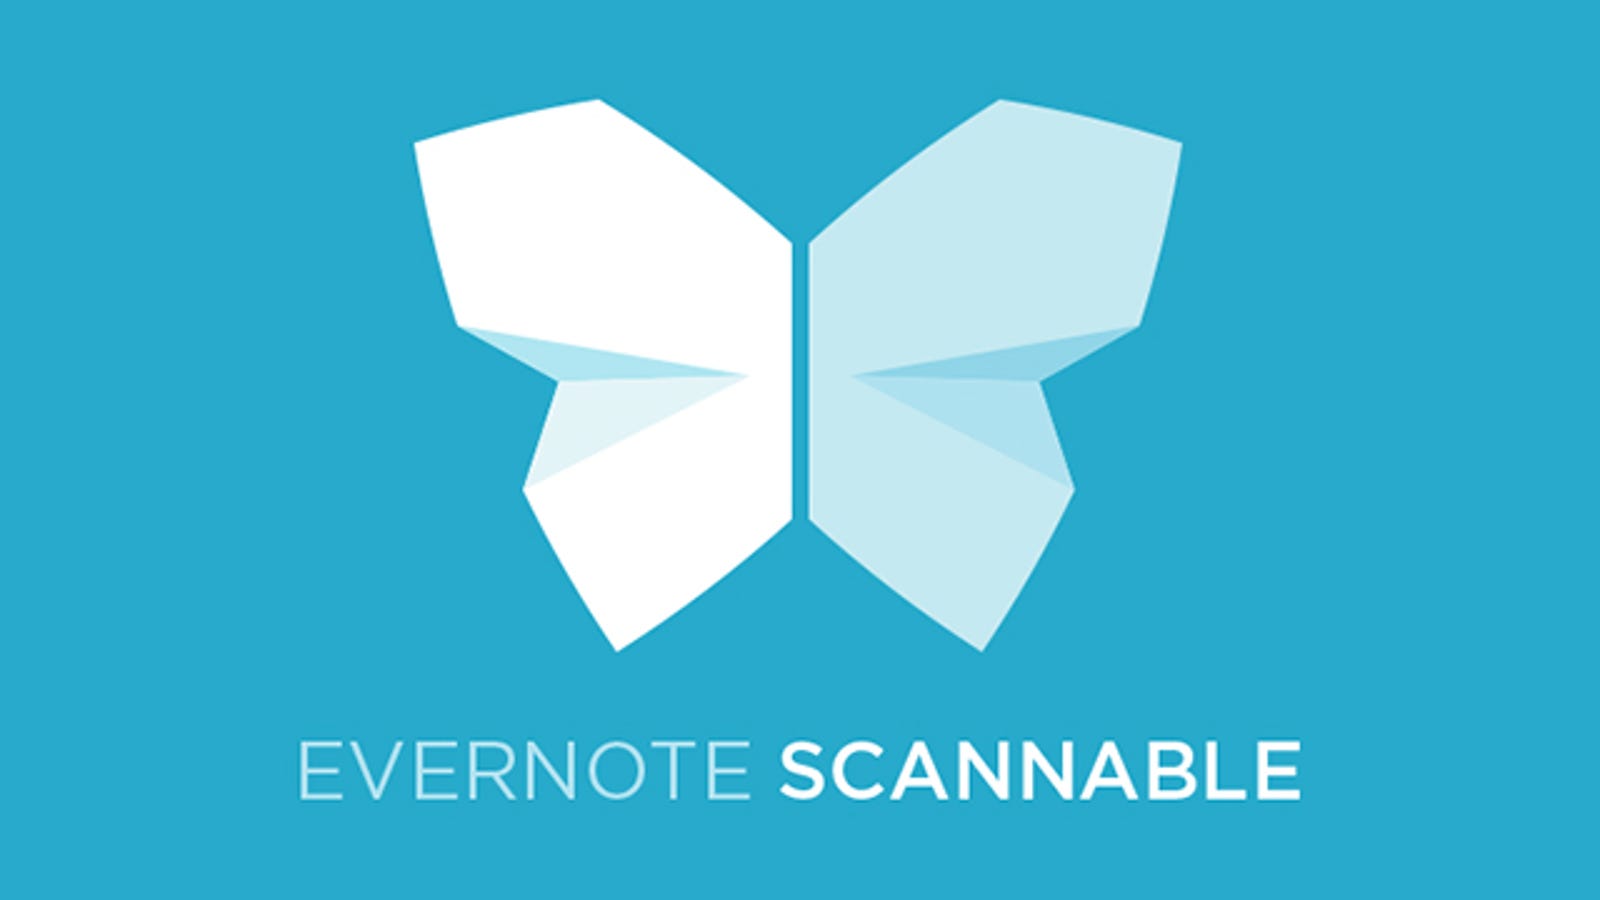 how to use evernote scannable app